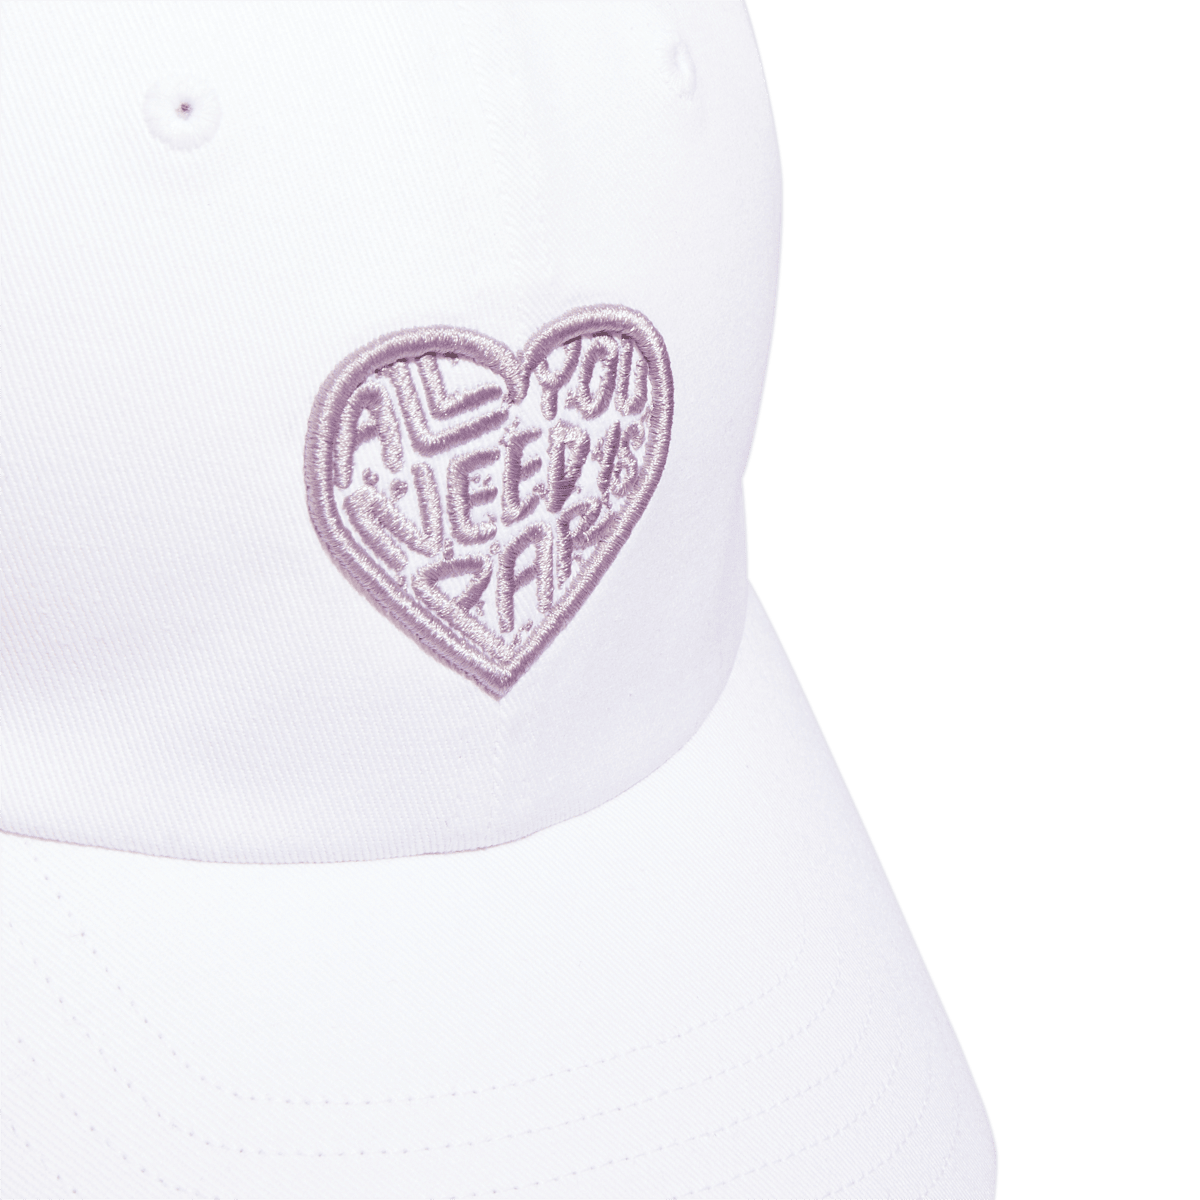 All You Need Is Par Women's Hat